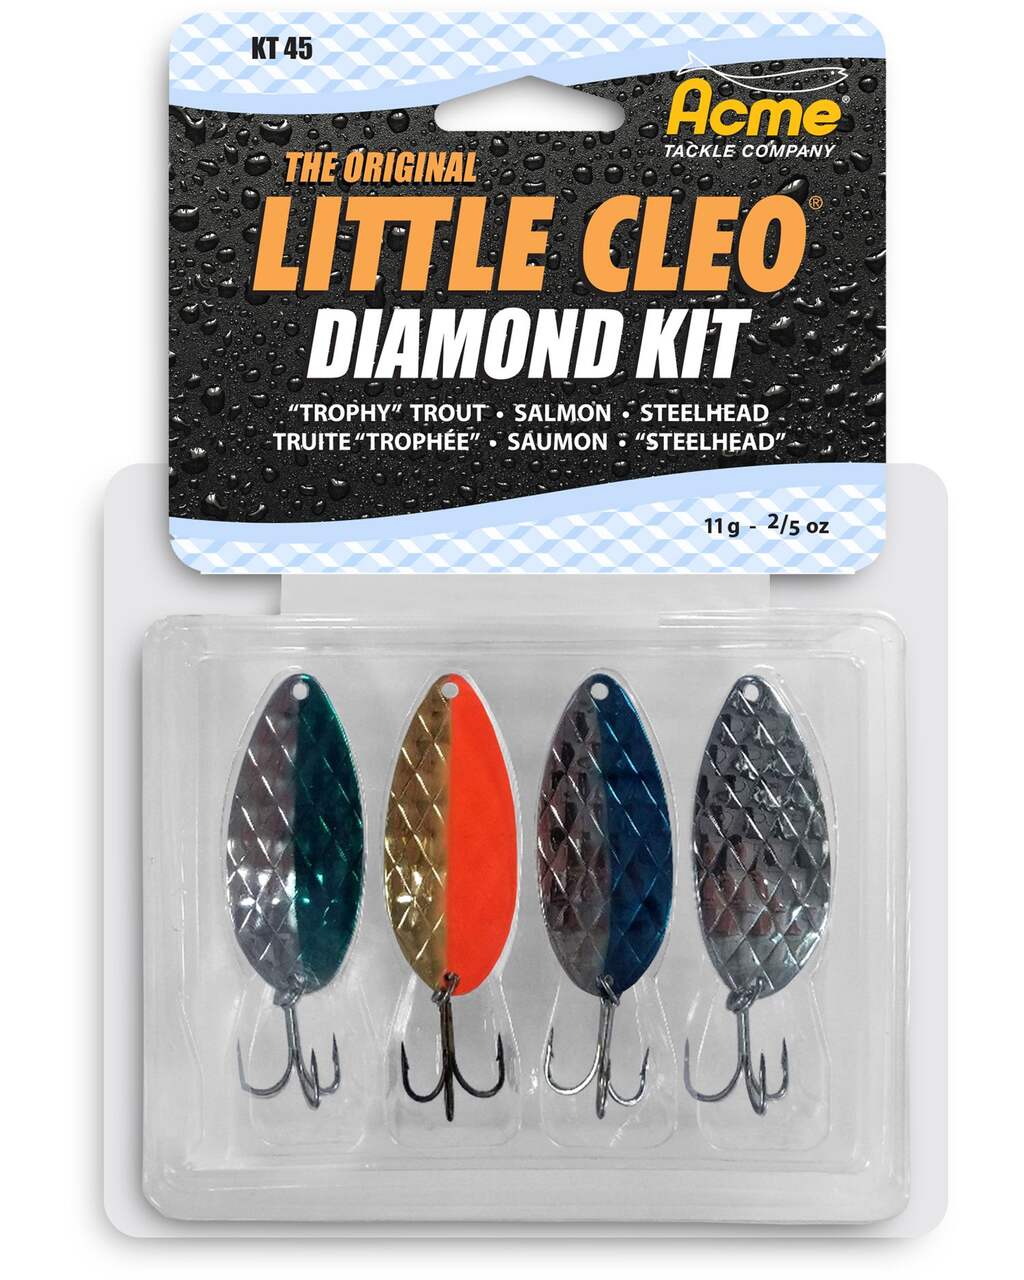 Acme Tackle Little Cleo Spoon, 3-1/4-in, 4-pk